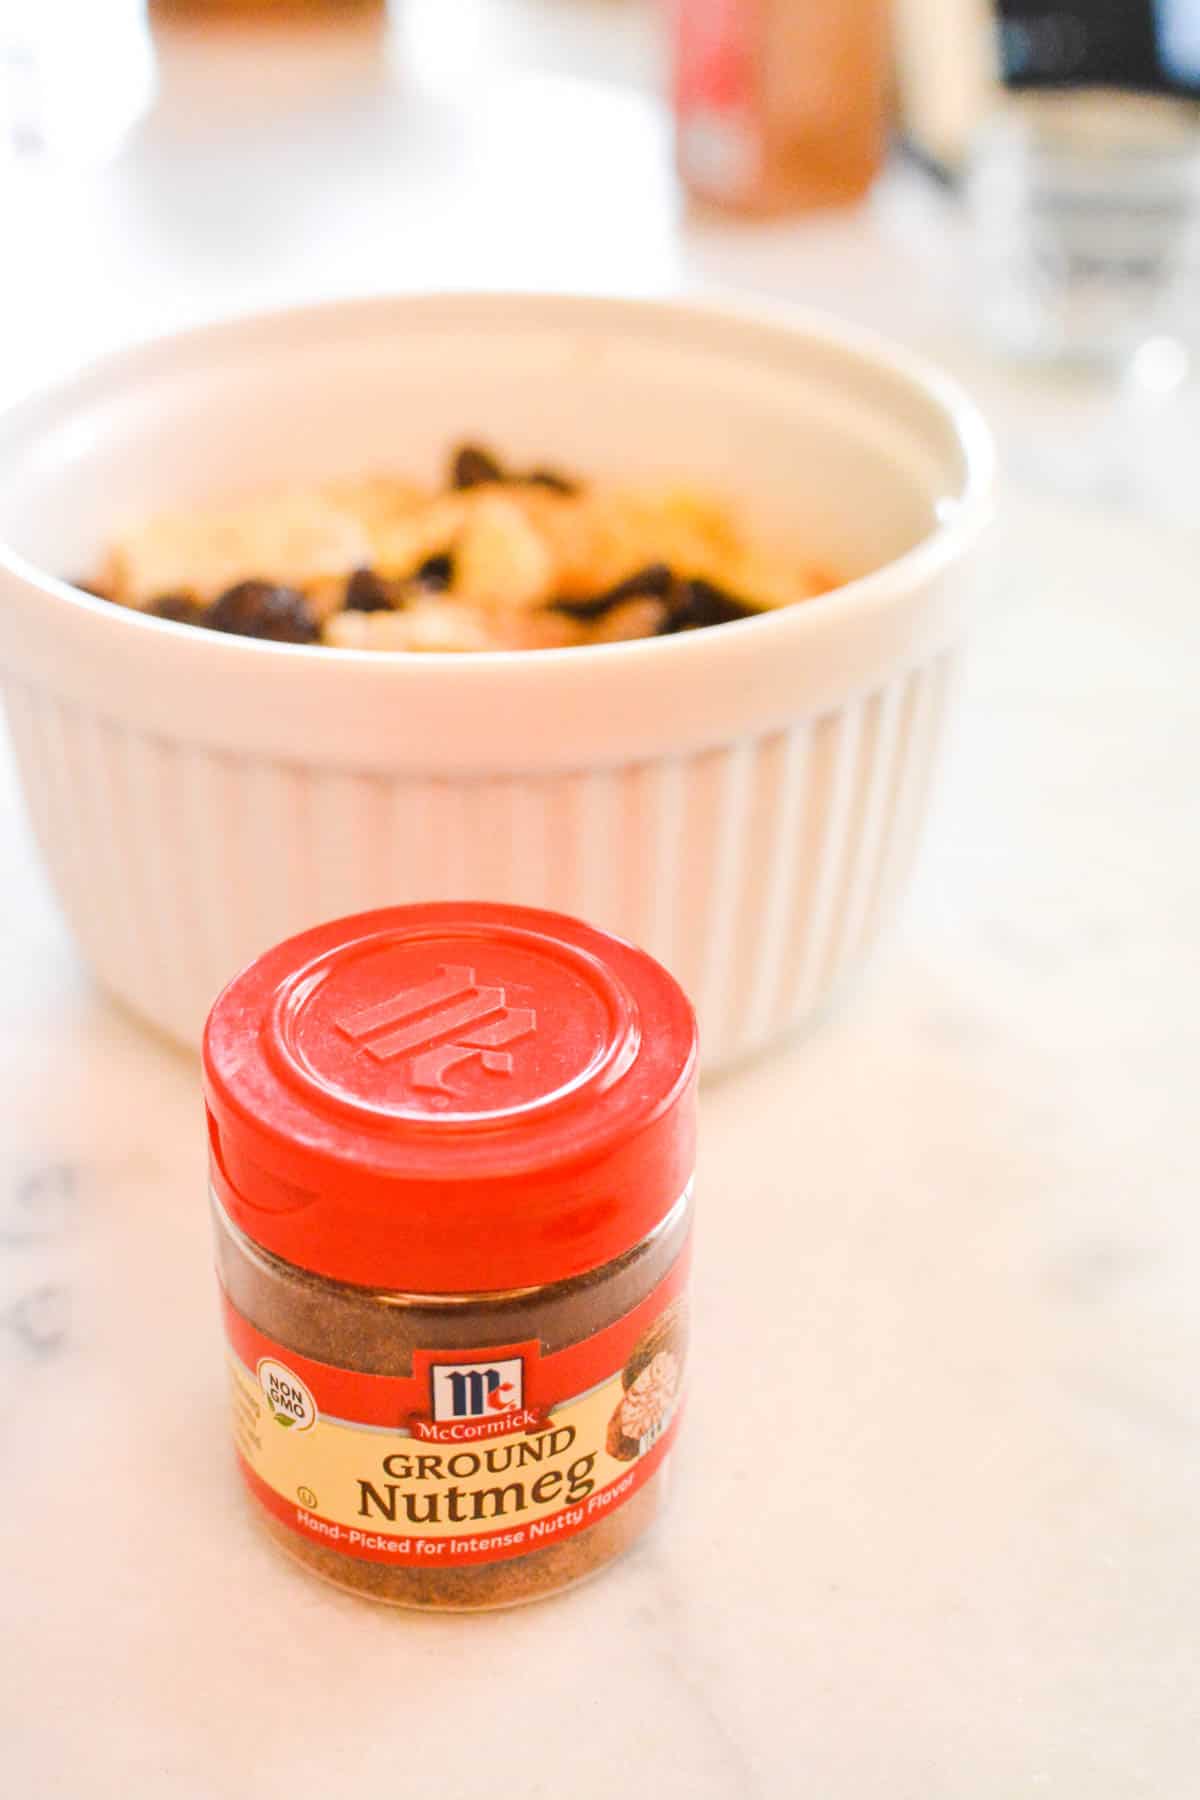 A white ramekin with a small container of nutmeg in front of it.